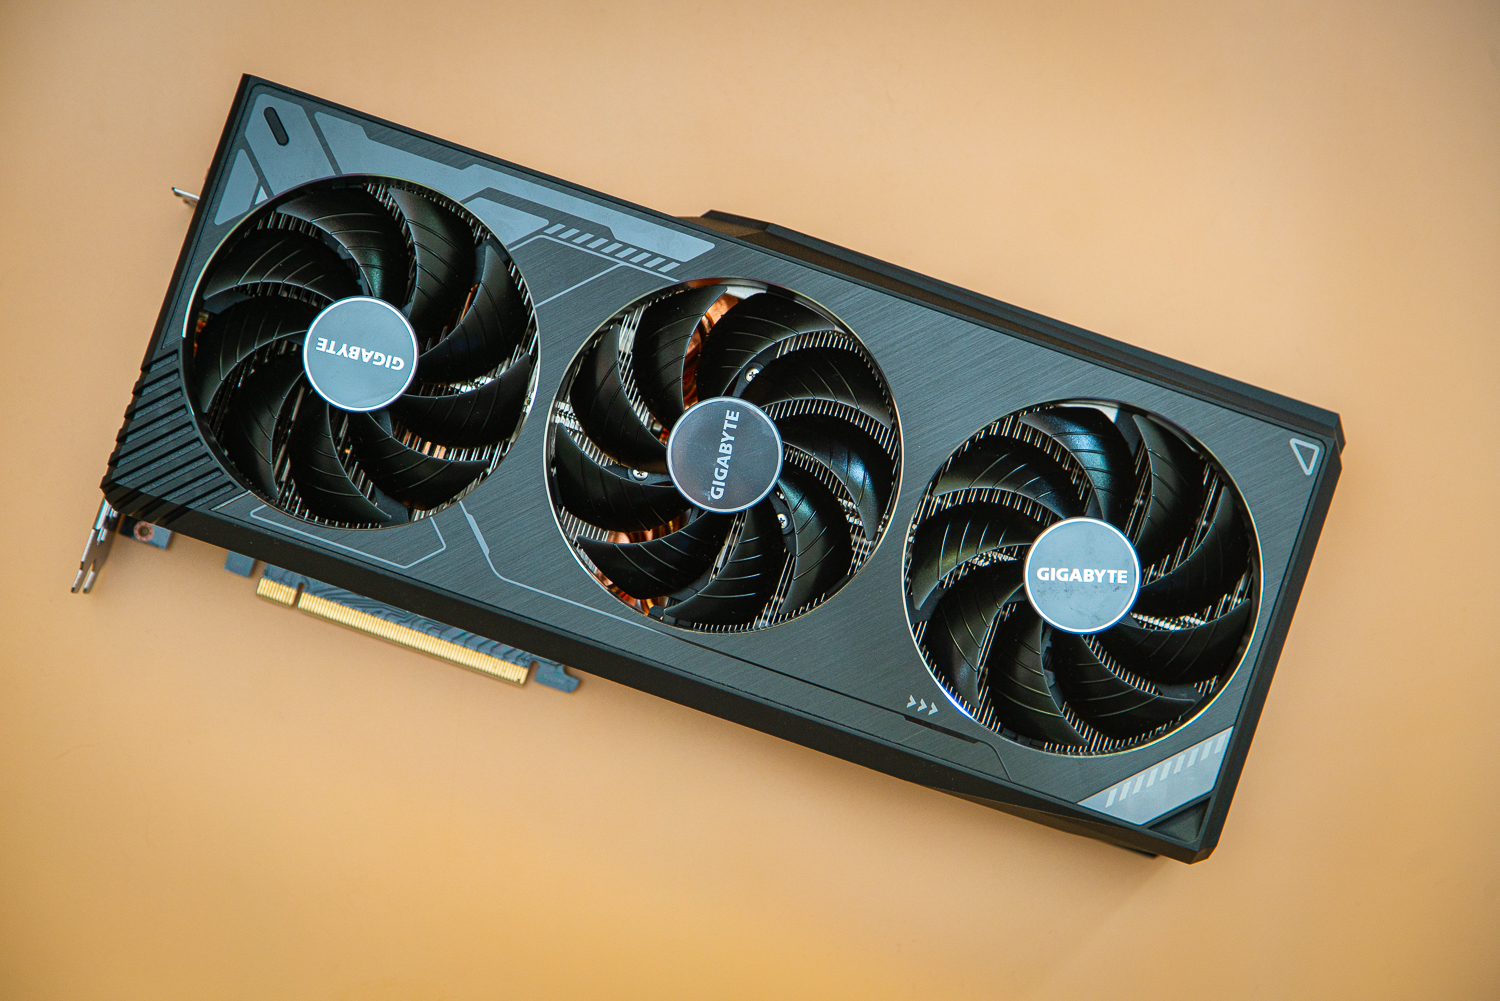 NVIDIA GeForce RTX 4060 Ti 16 GB Review - Twice the VRAM Making a  Difference? - Overclocking & Power Limits